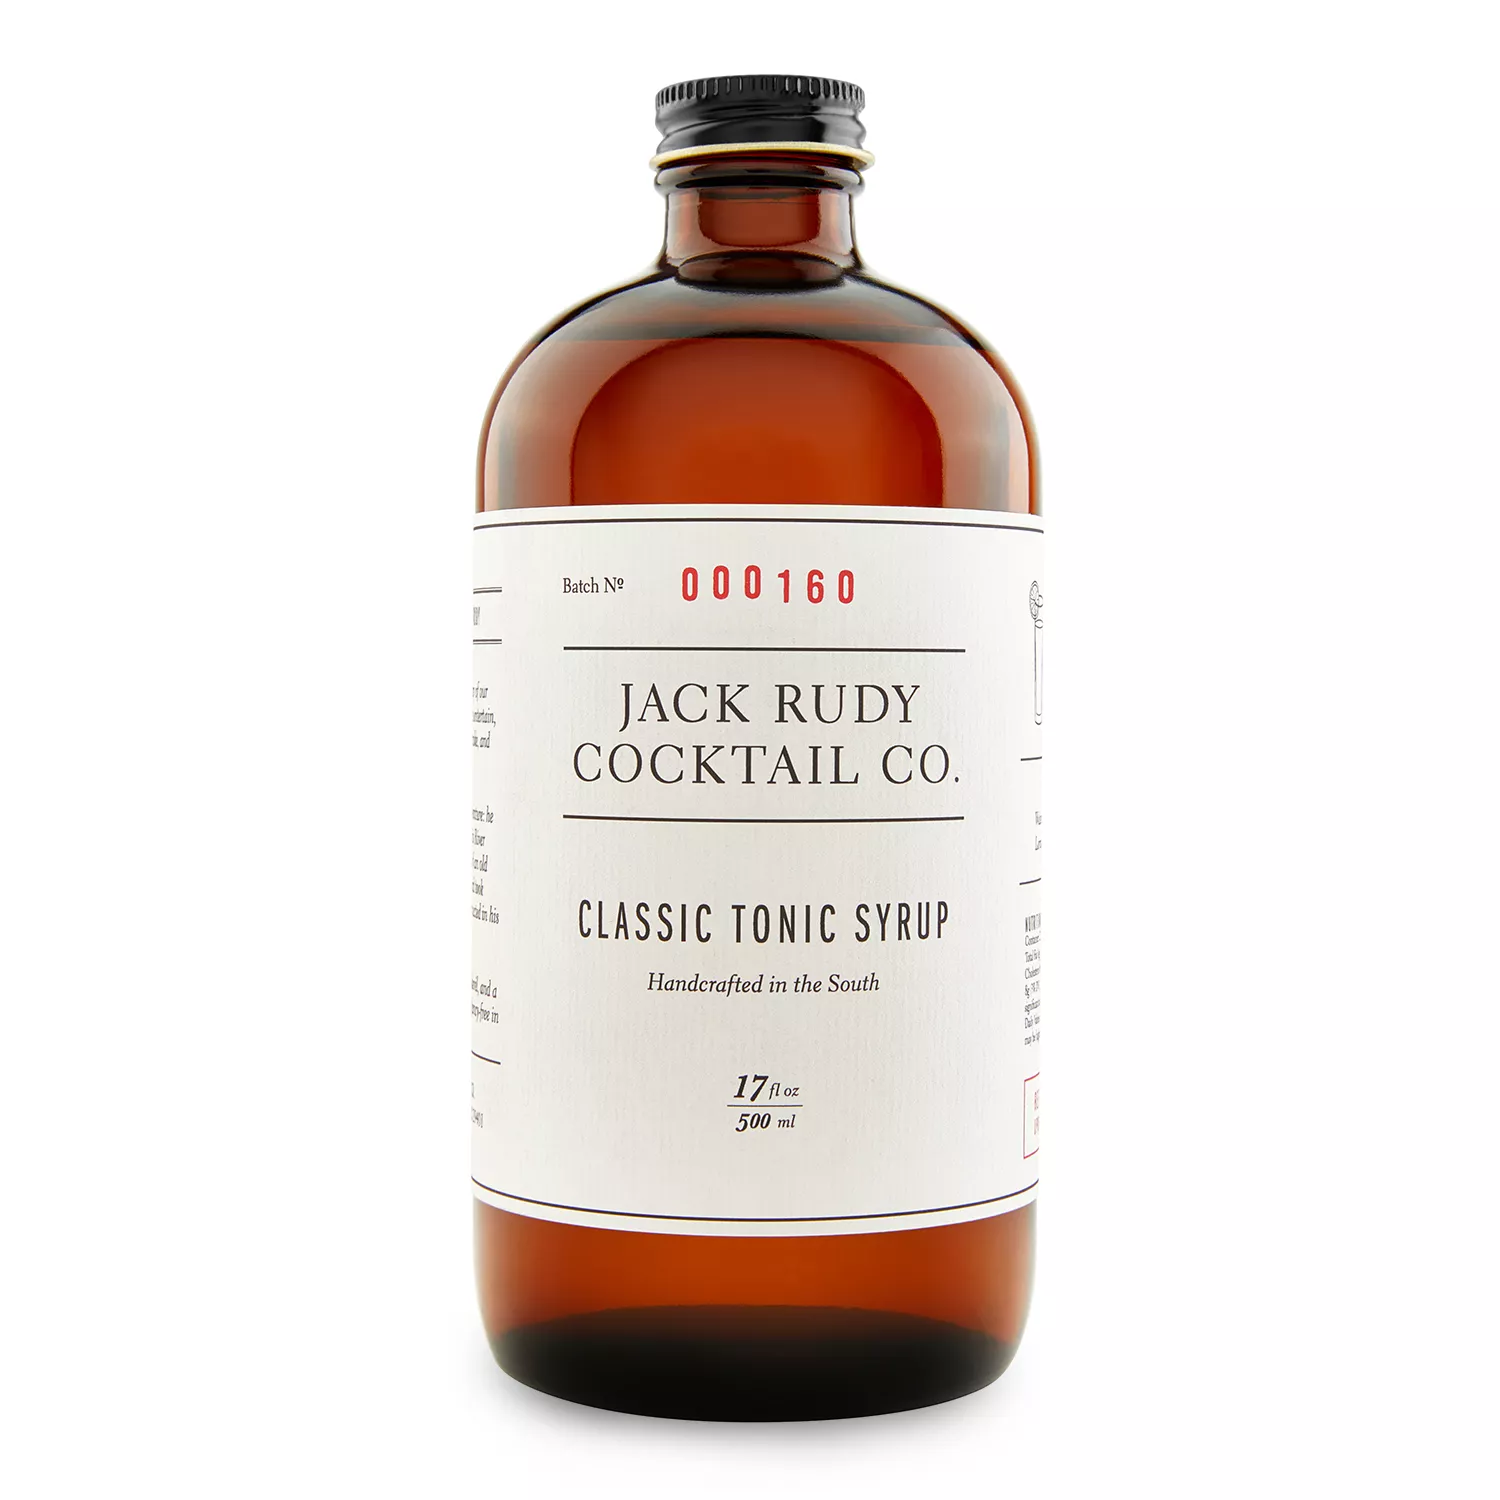 Jack Rudy Cocktail Co. Classic Tonic